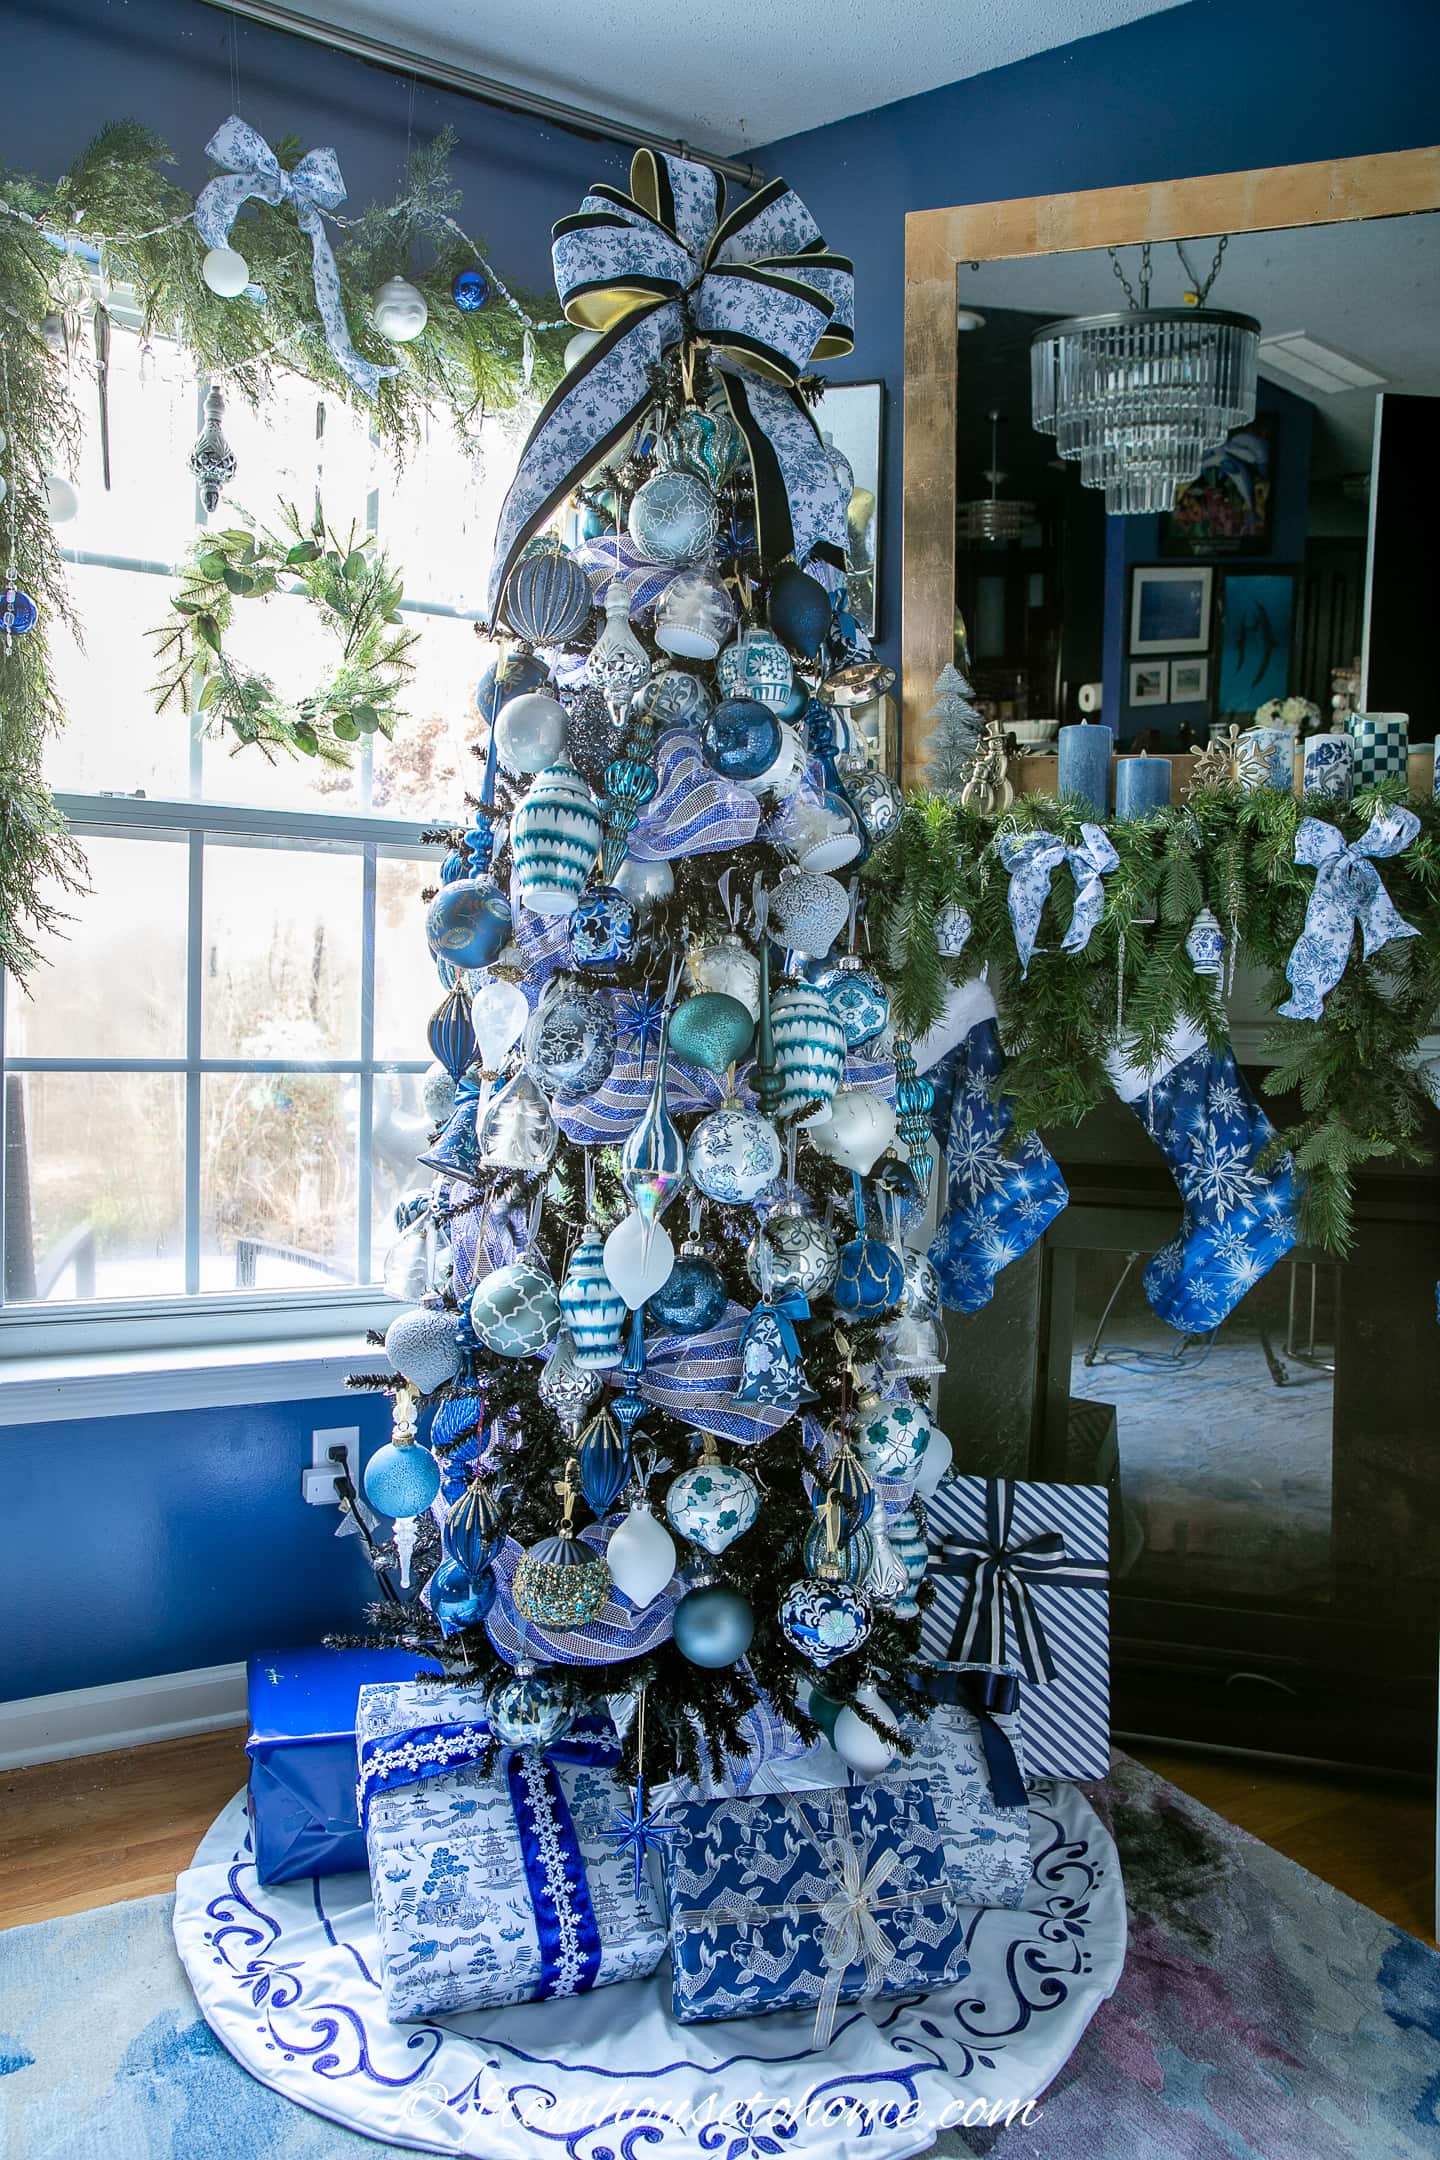 blue and white chinoiserie ornaments on a black Christmas tree